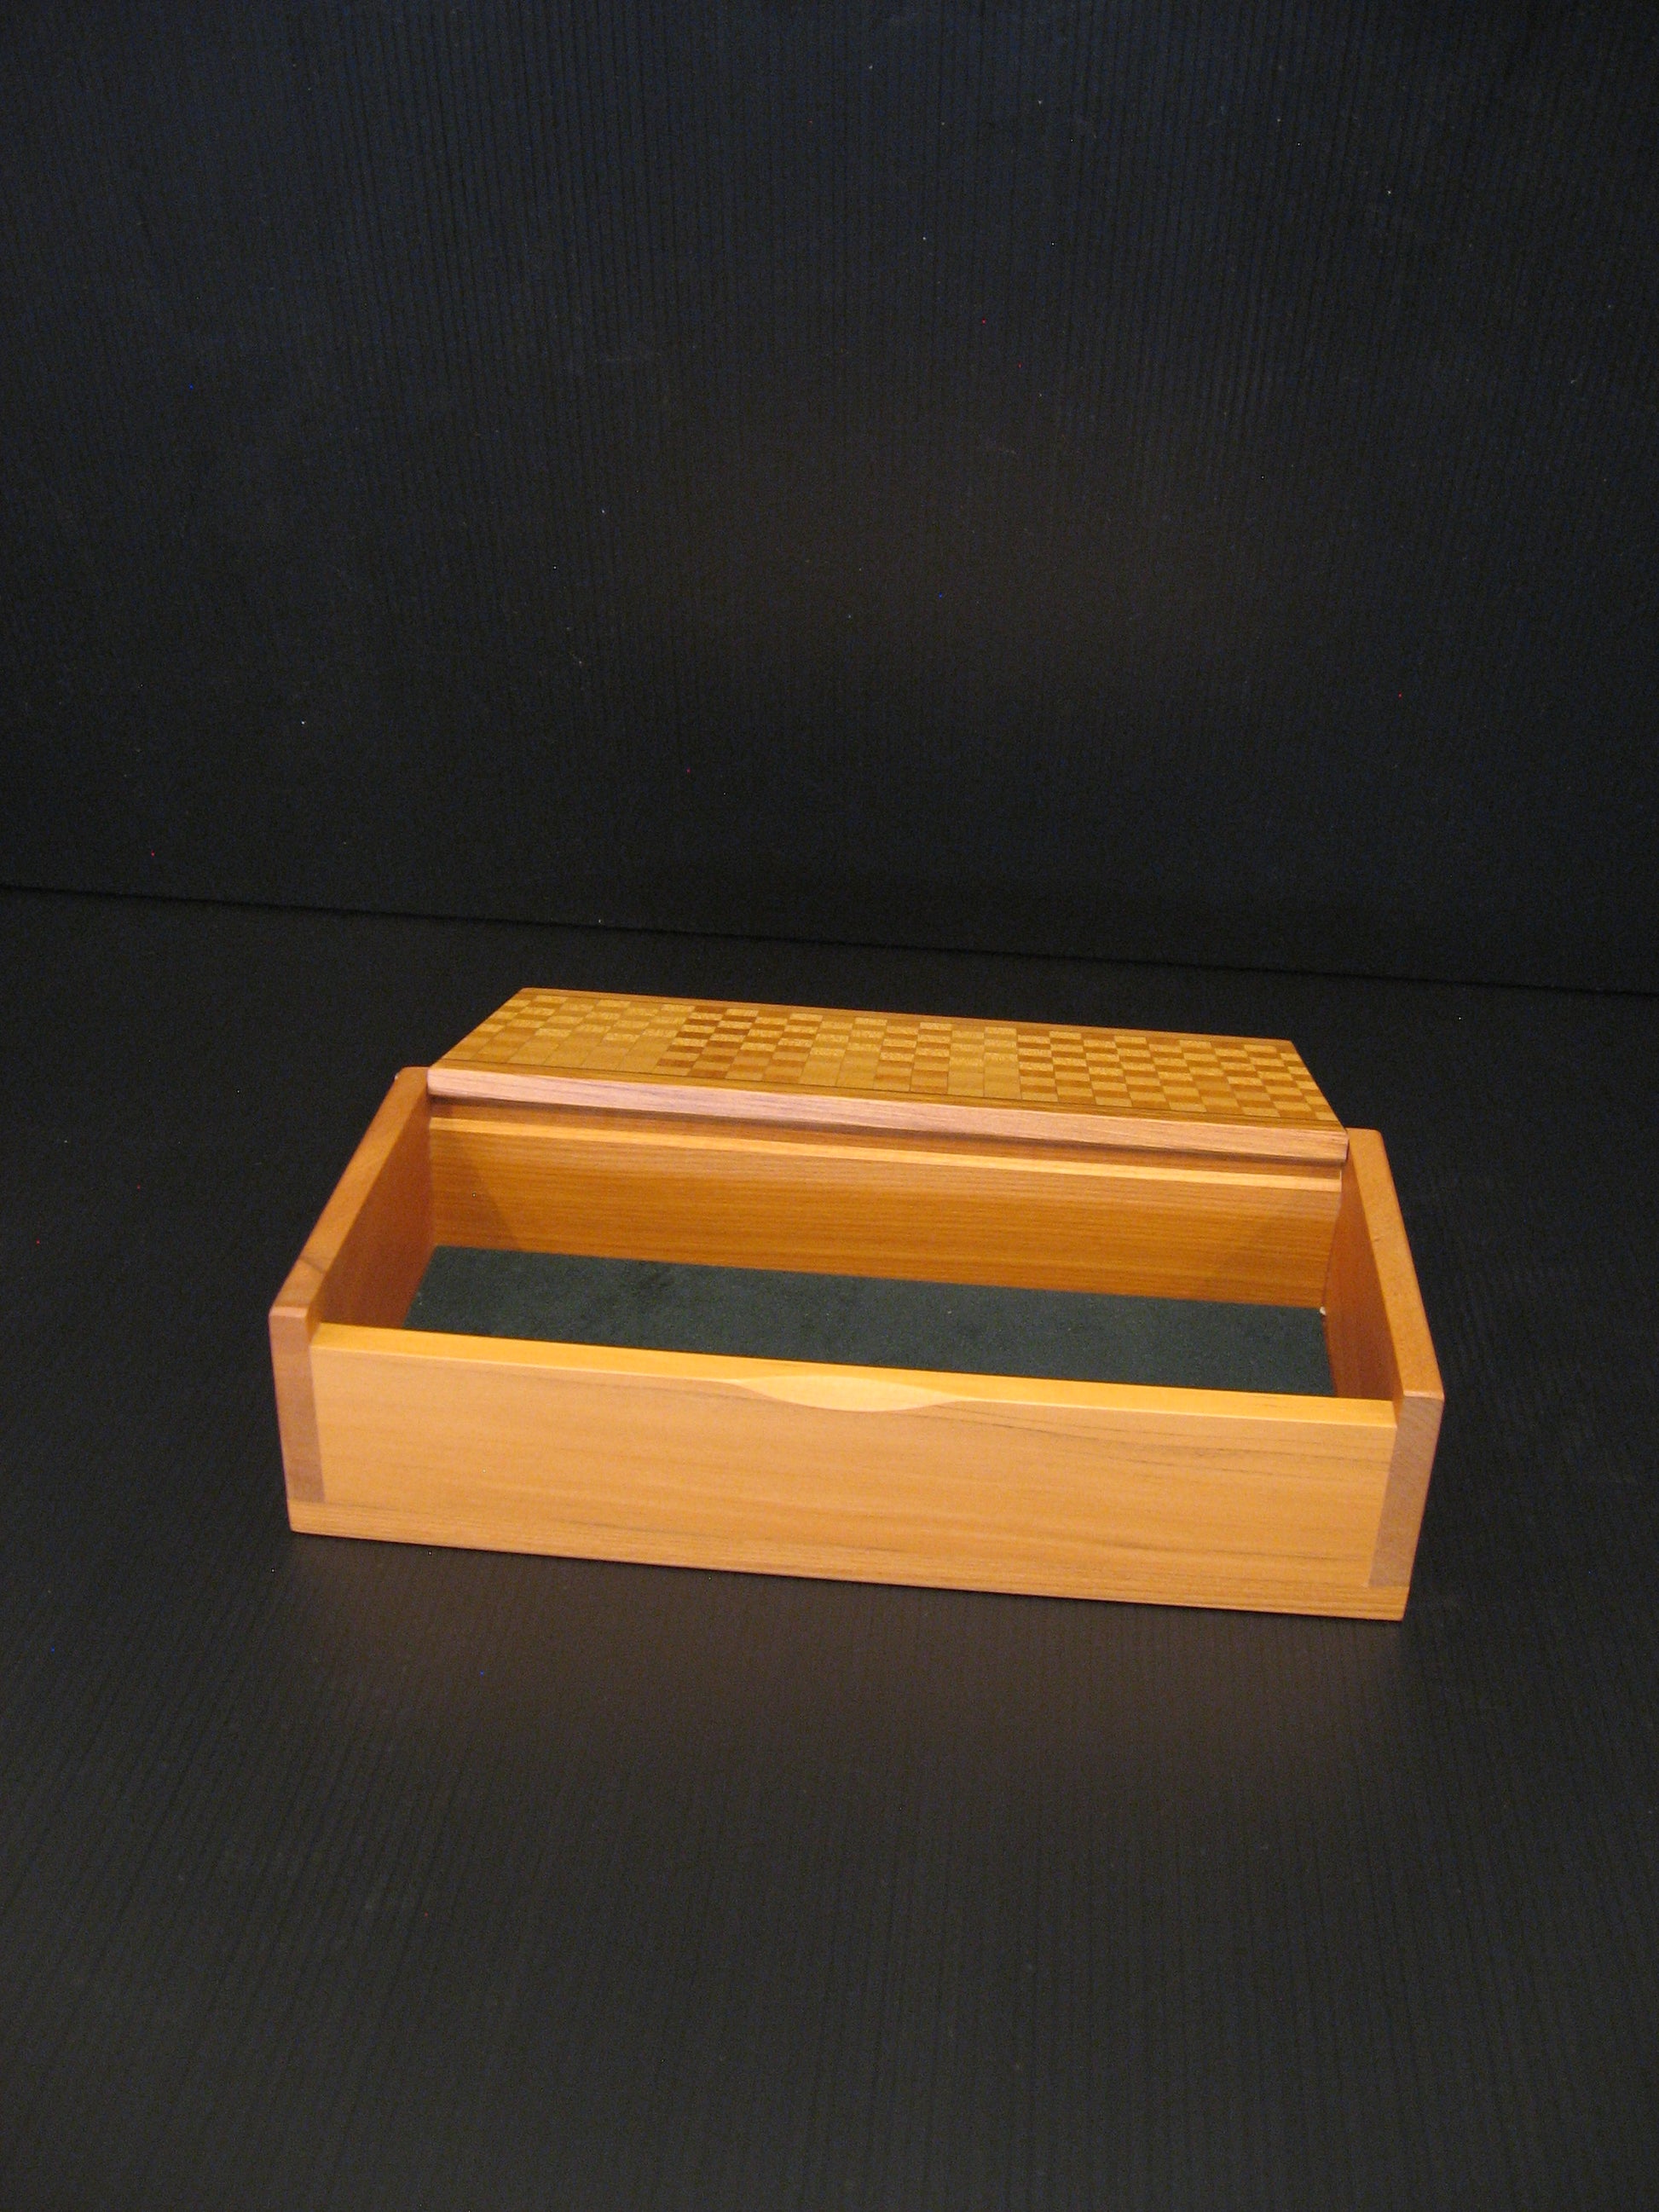 Fully opened Rimu Patterned Wooden Box by Timber Arts of NZ Silver Fern Gallery